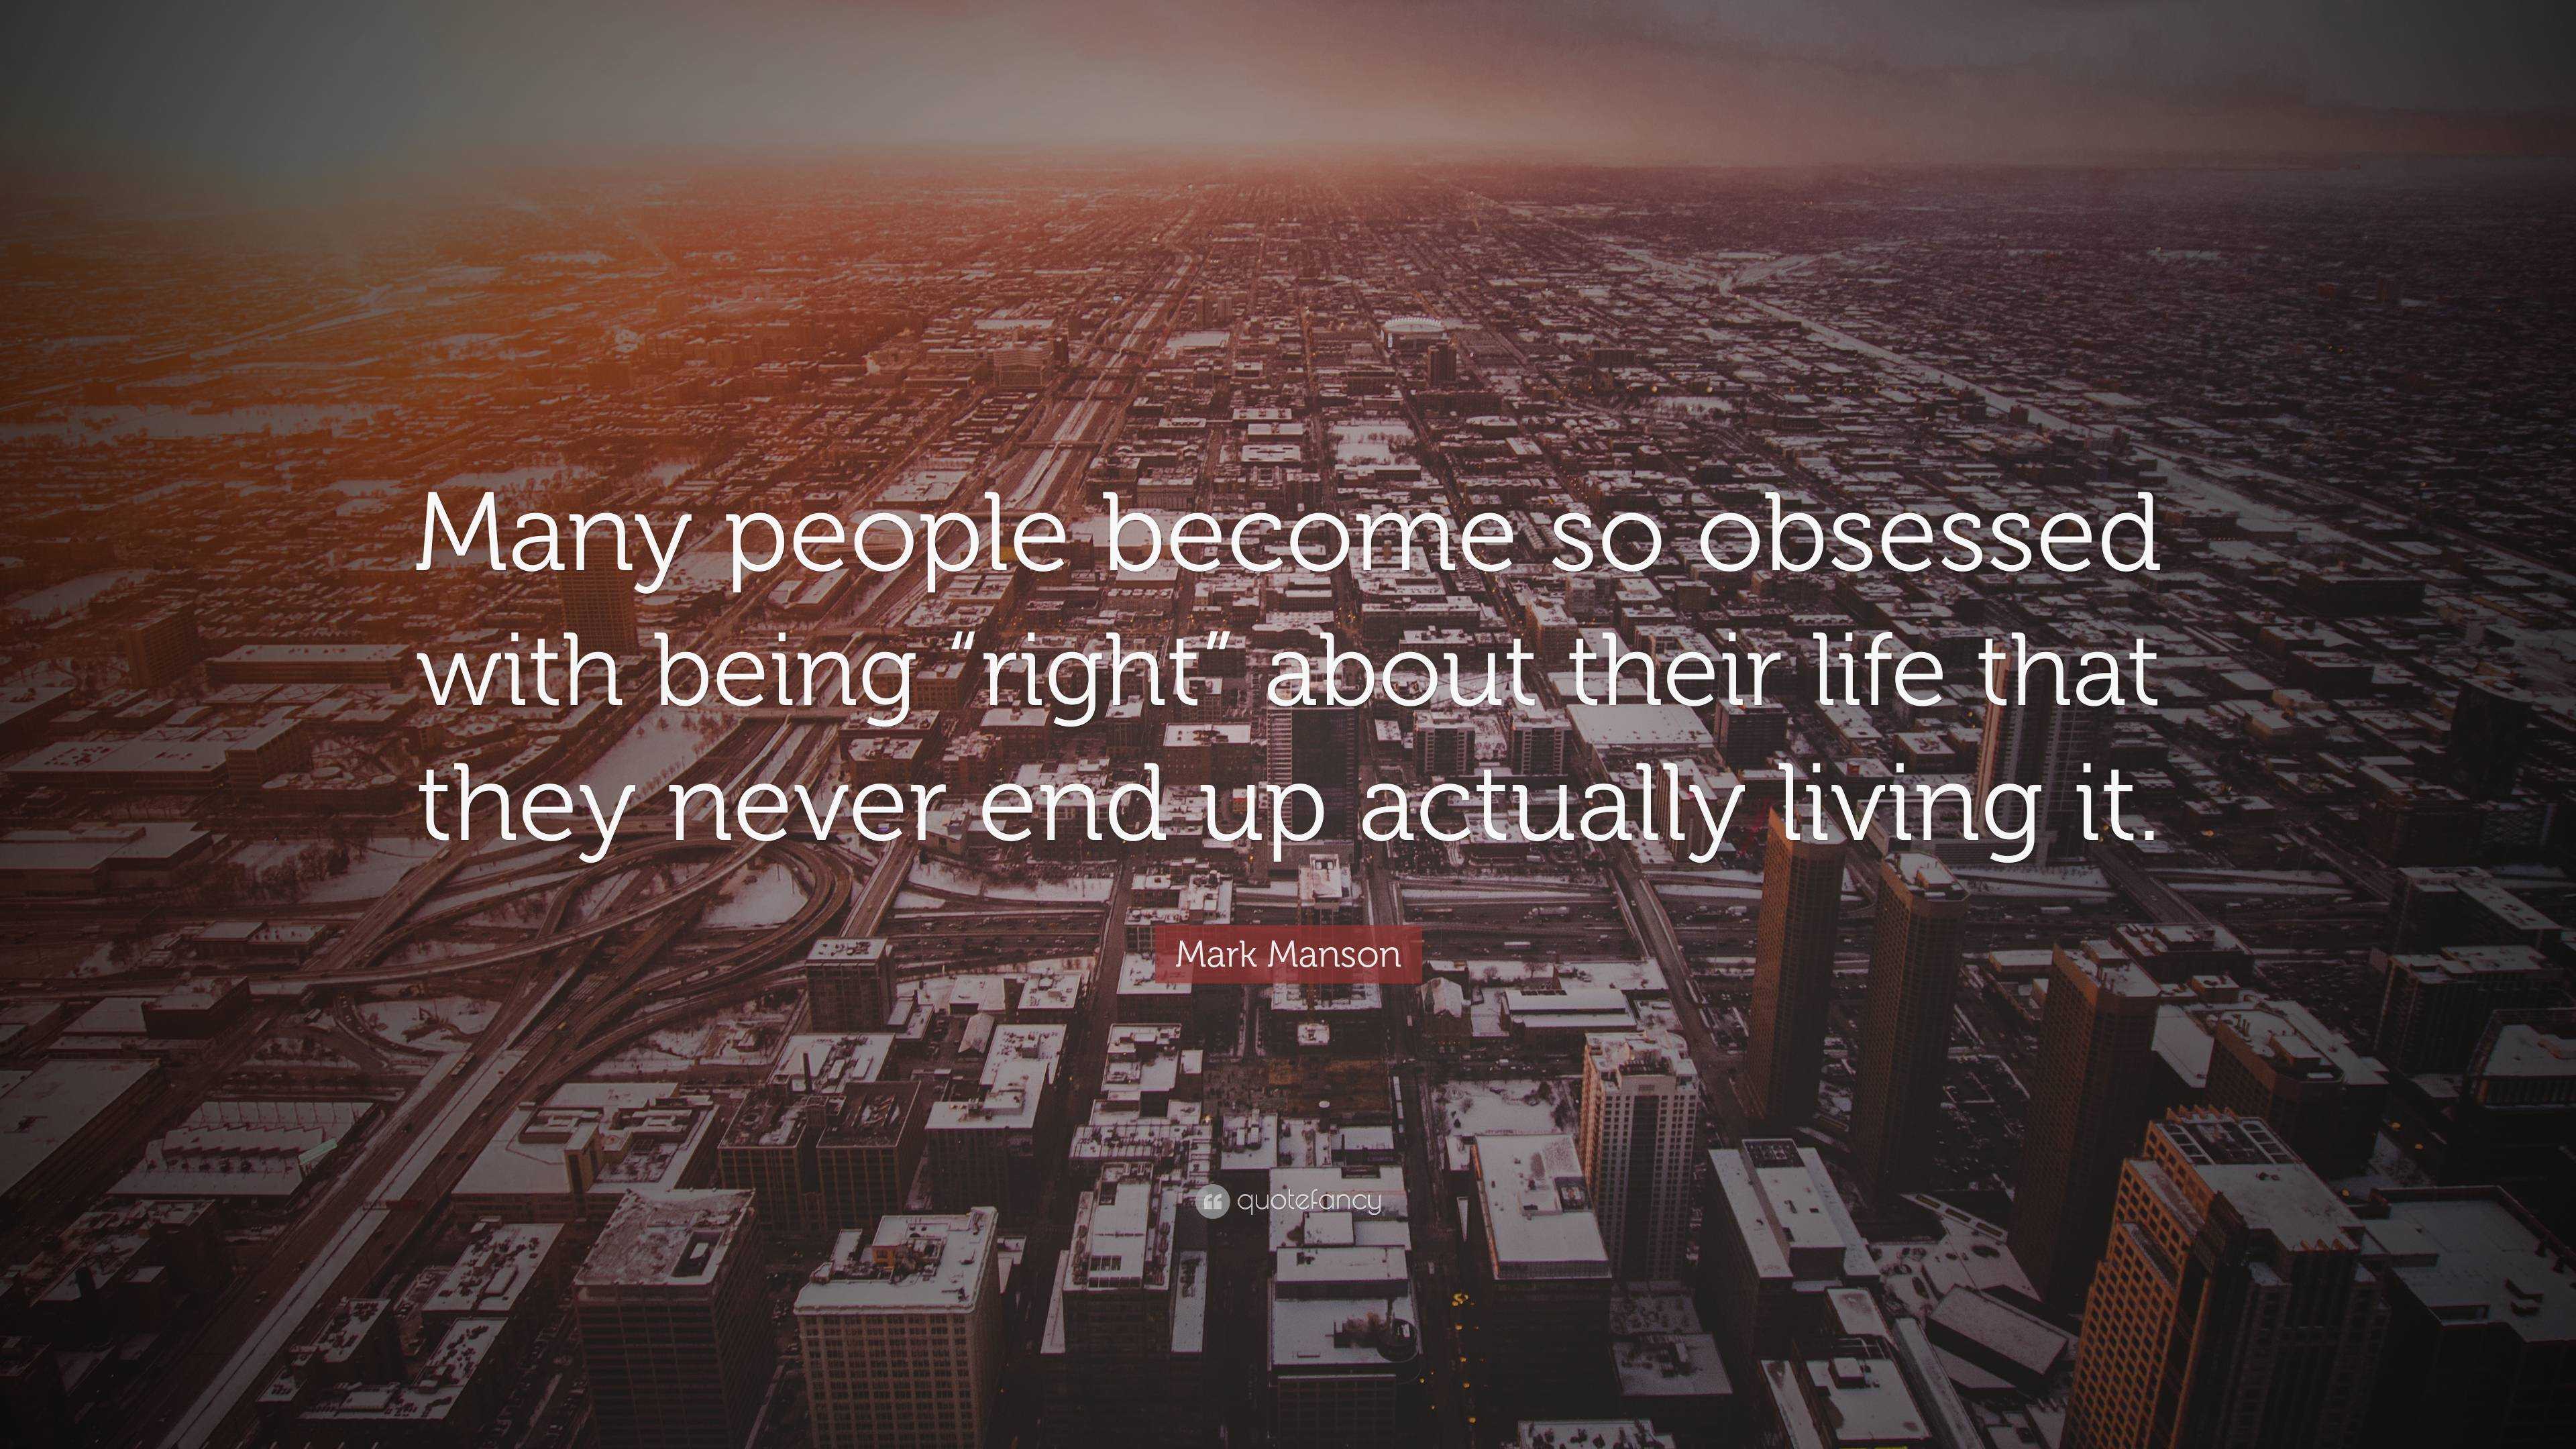 Mark Manson Quote: “Many people become so obsessed with being “right” about  their life that they